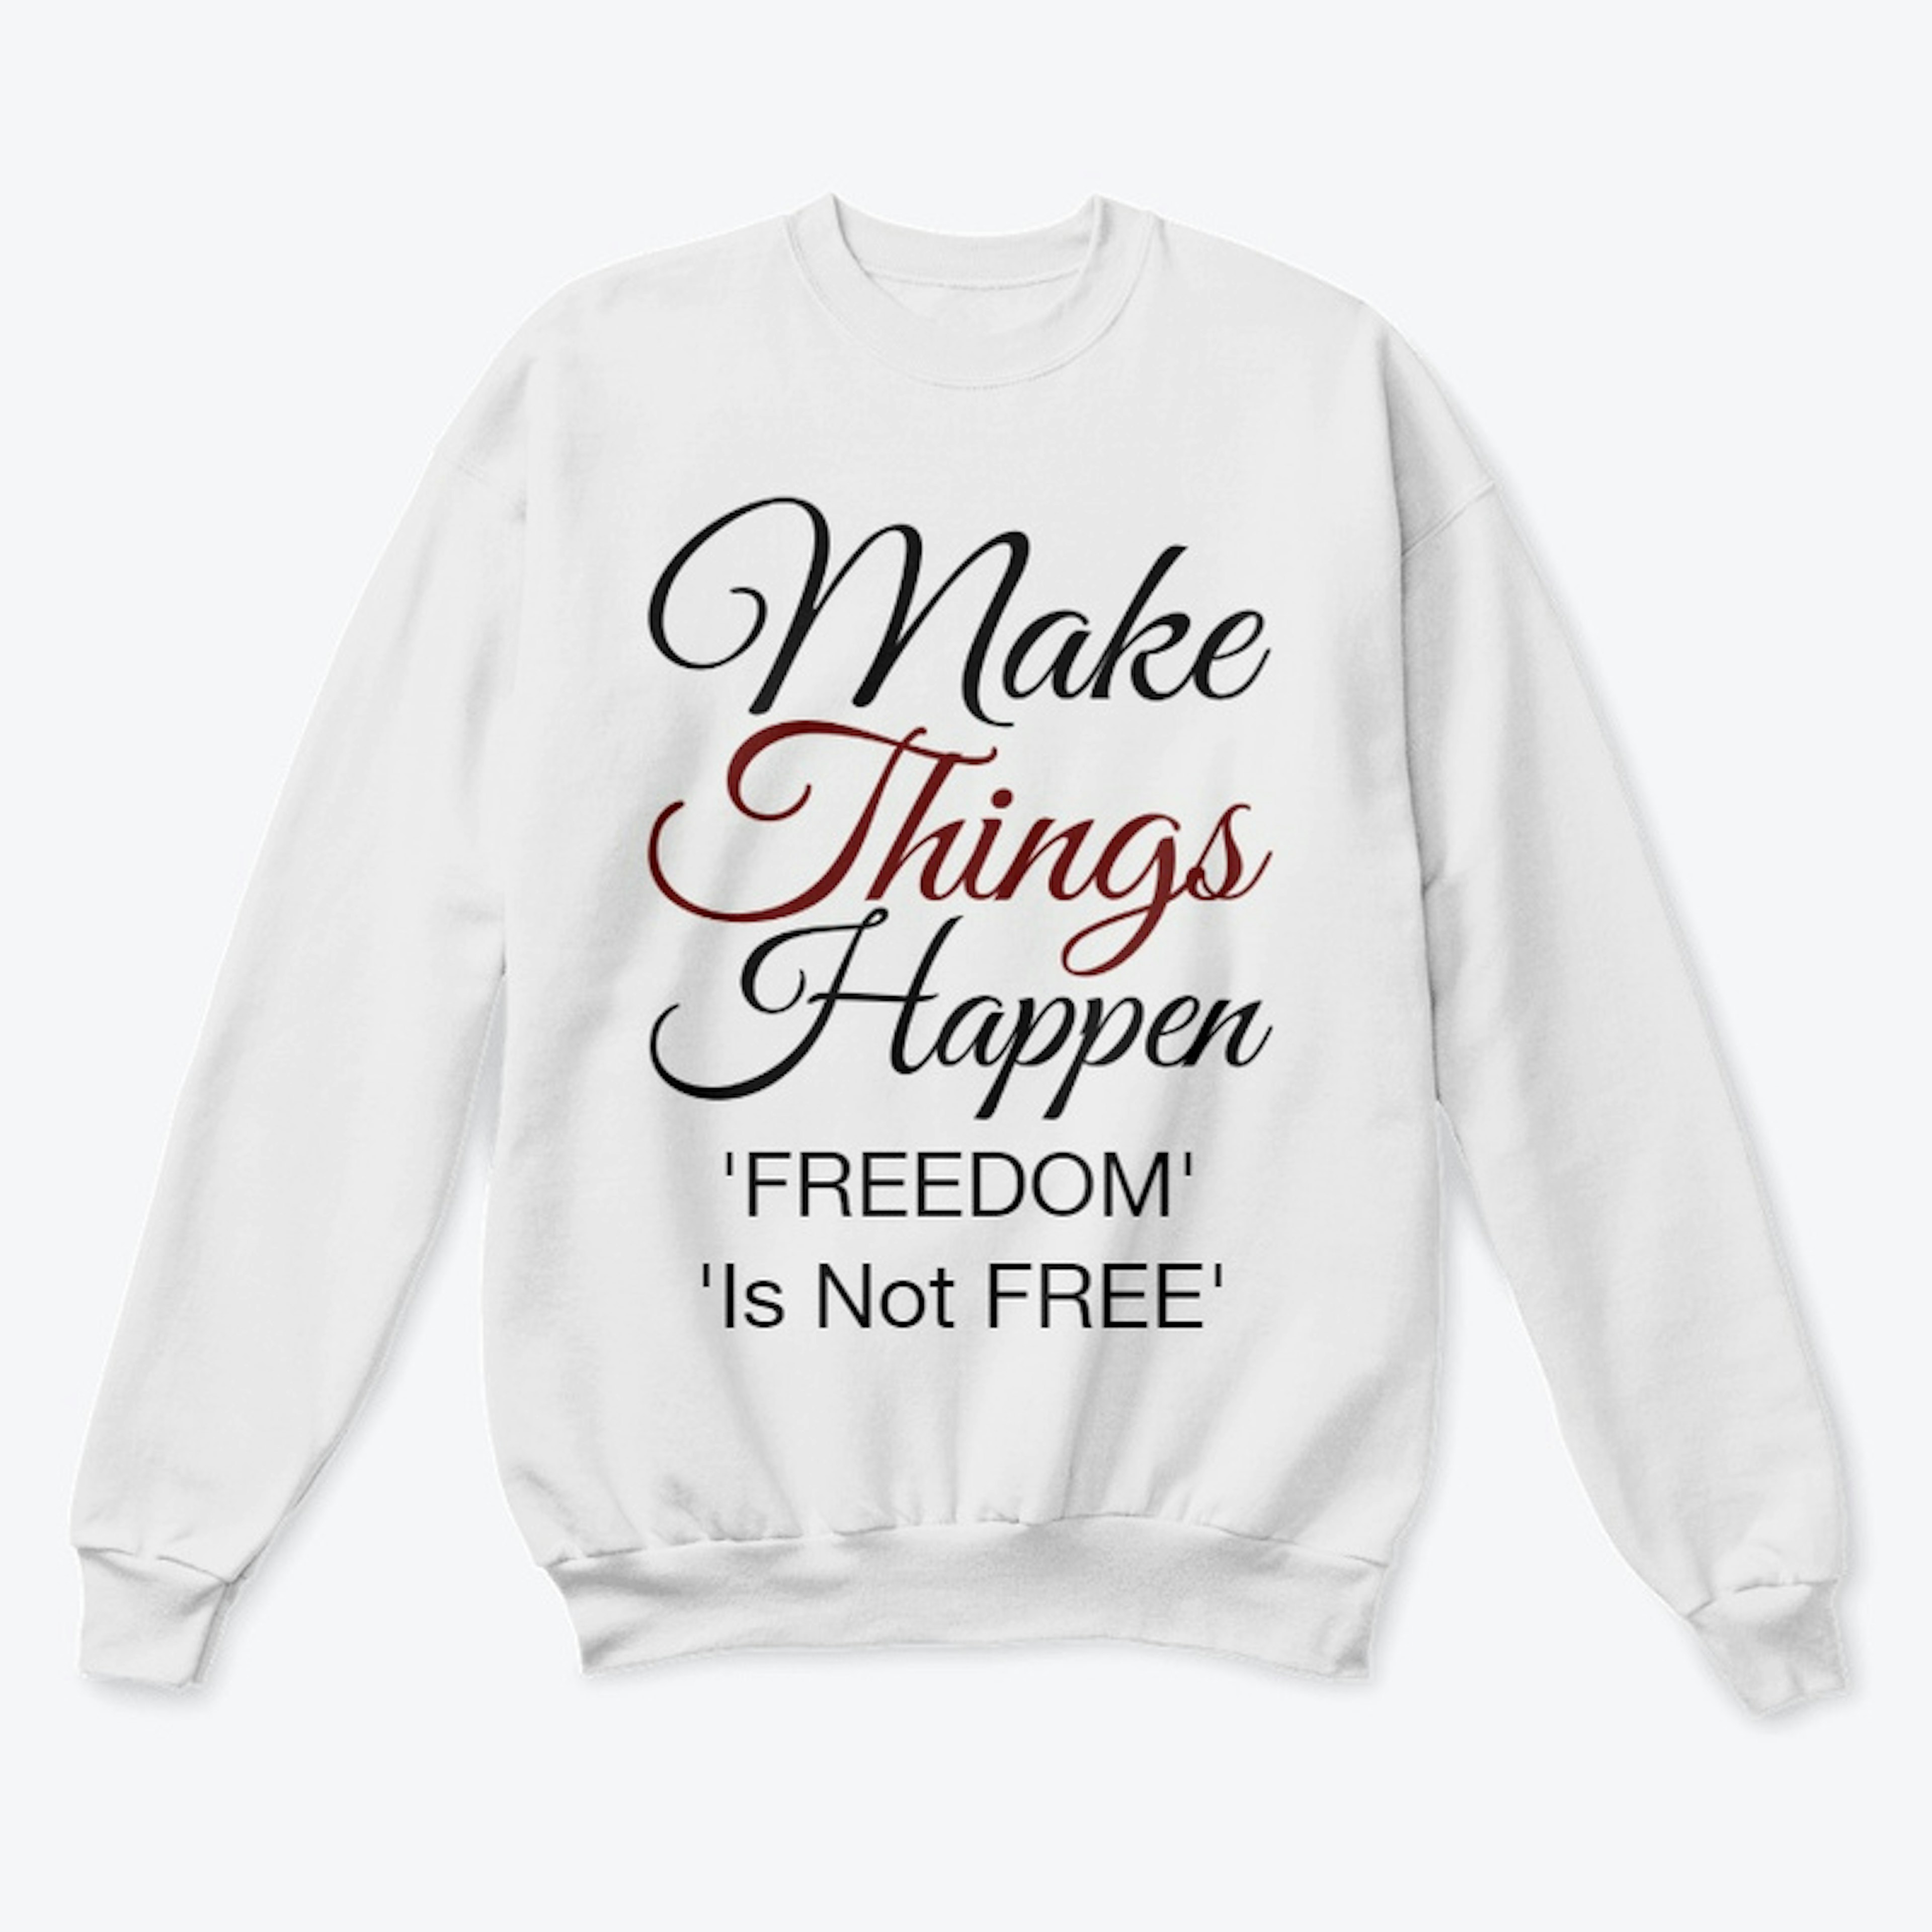 Make Things Happen. Freedom Is Not FREE.